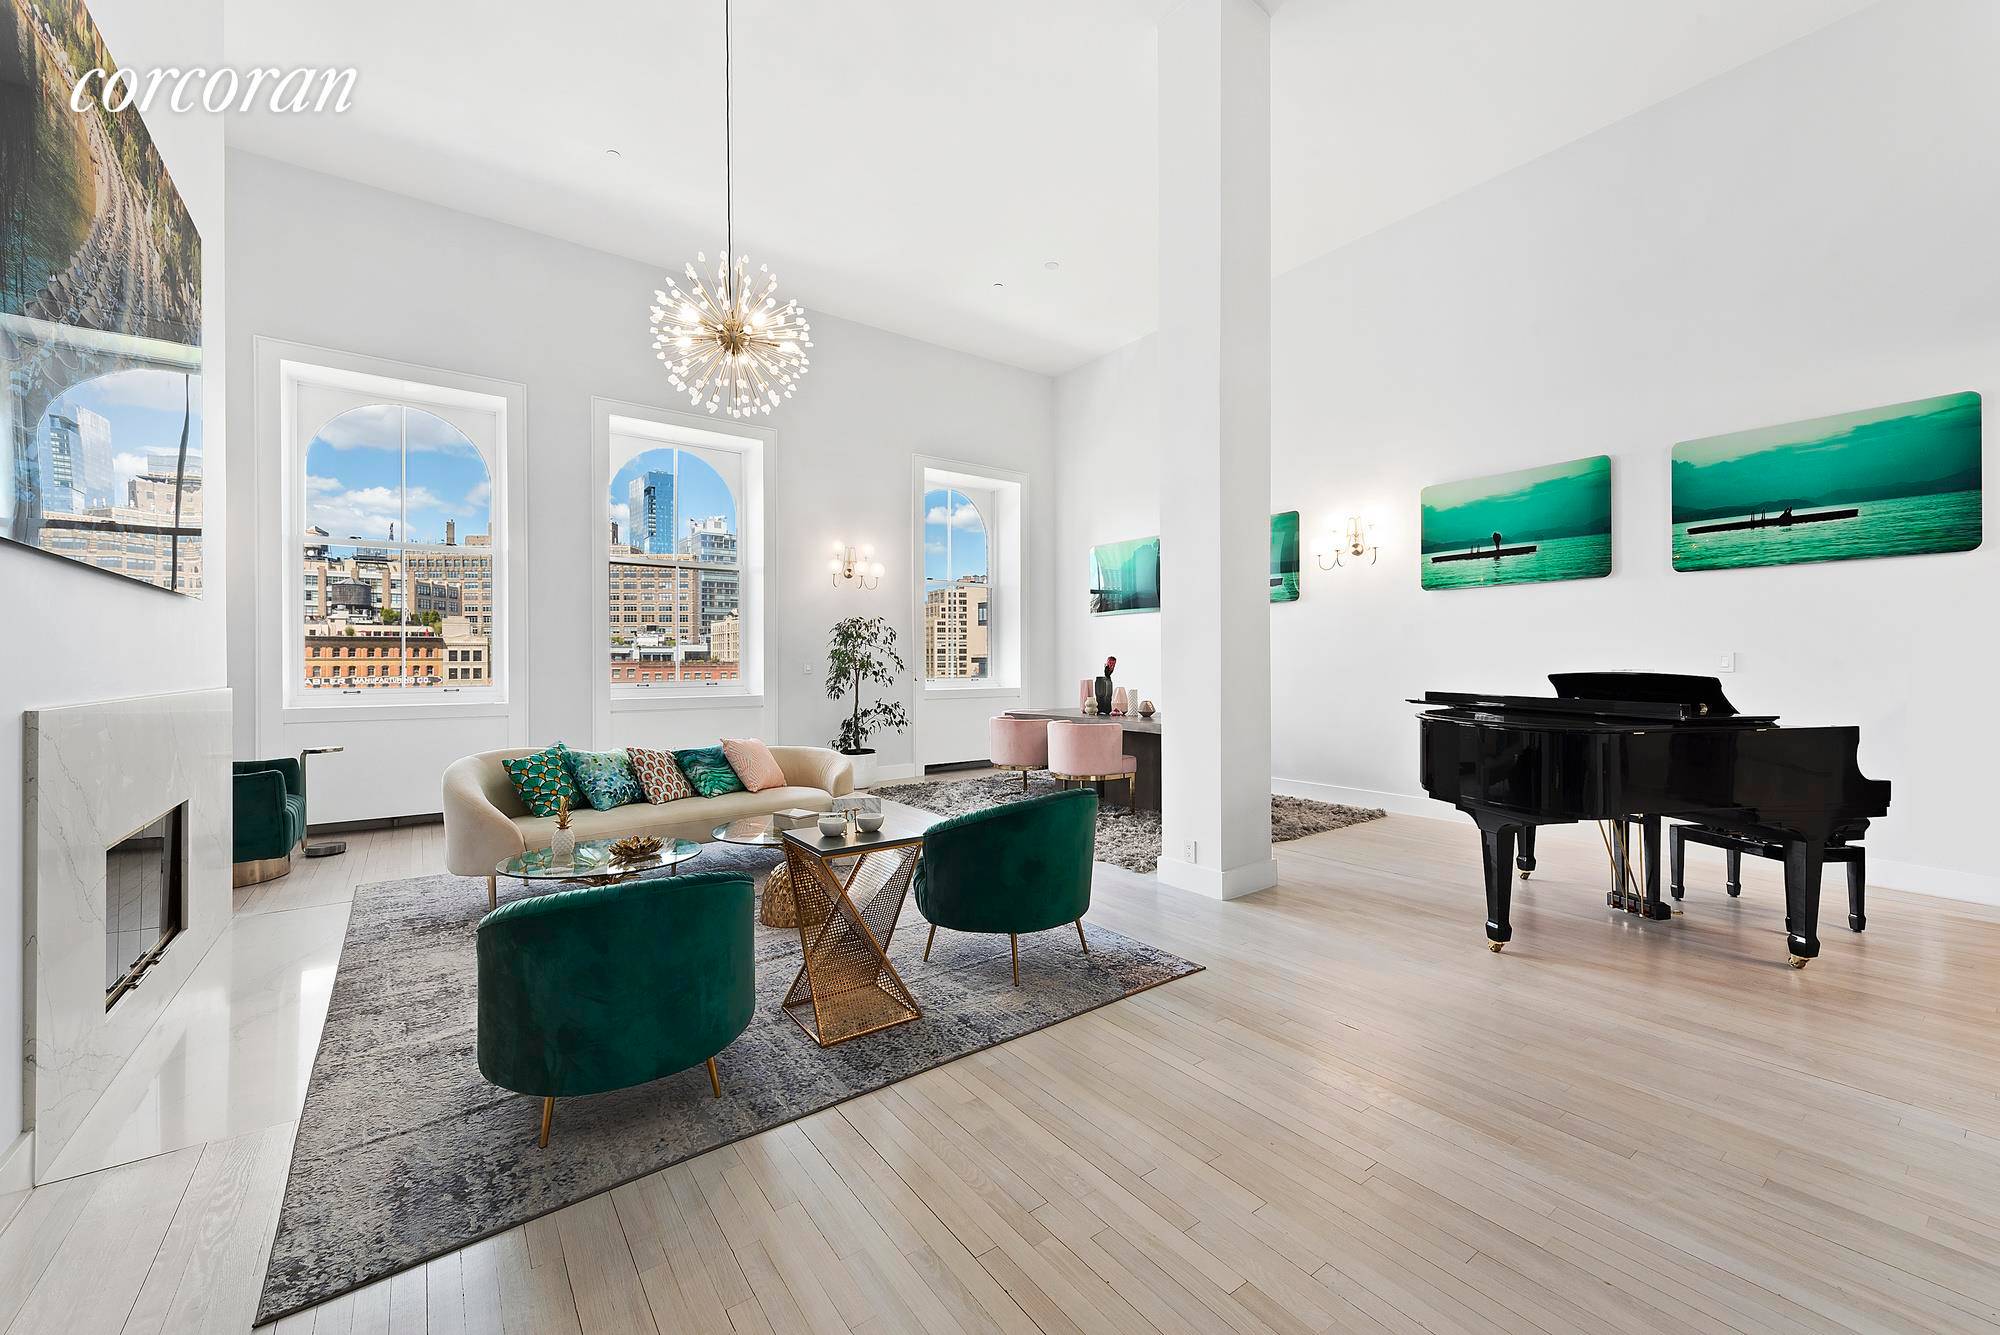 Impeccably renovated and beautifully positioned atop the famed Merchants House Condominium, this outstanding four bedroom, four bathroom triplex is a peerless, mint condition sanctuary in the heart of Tribeca.